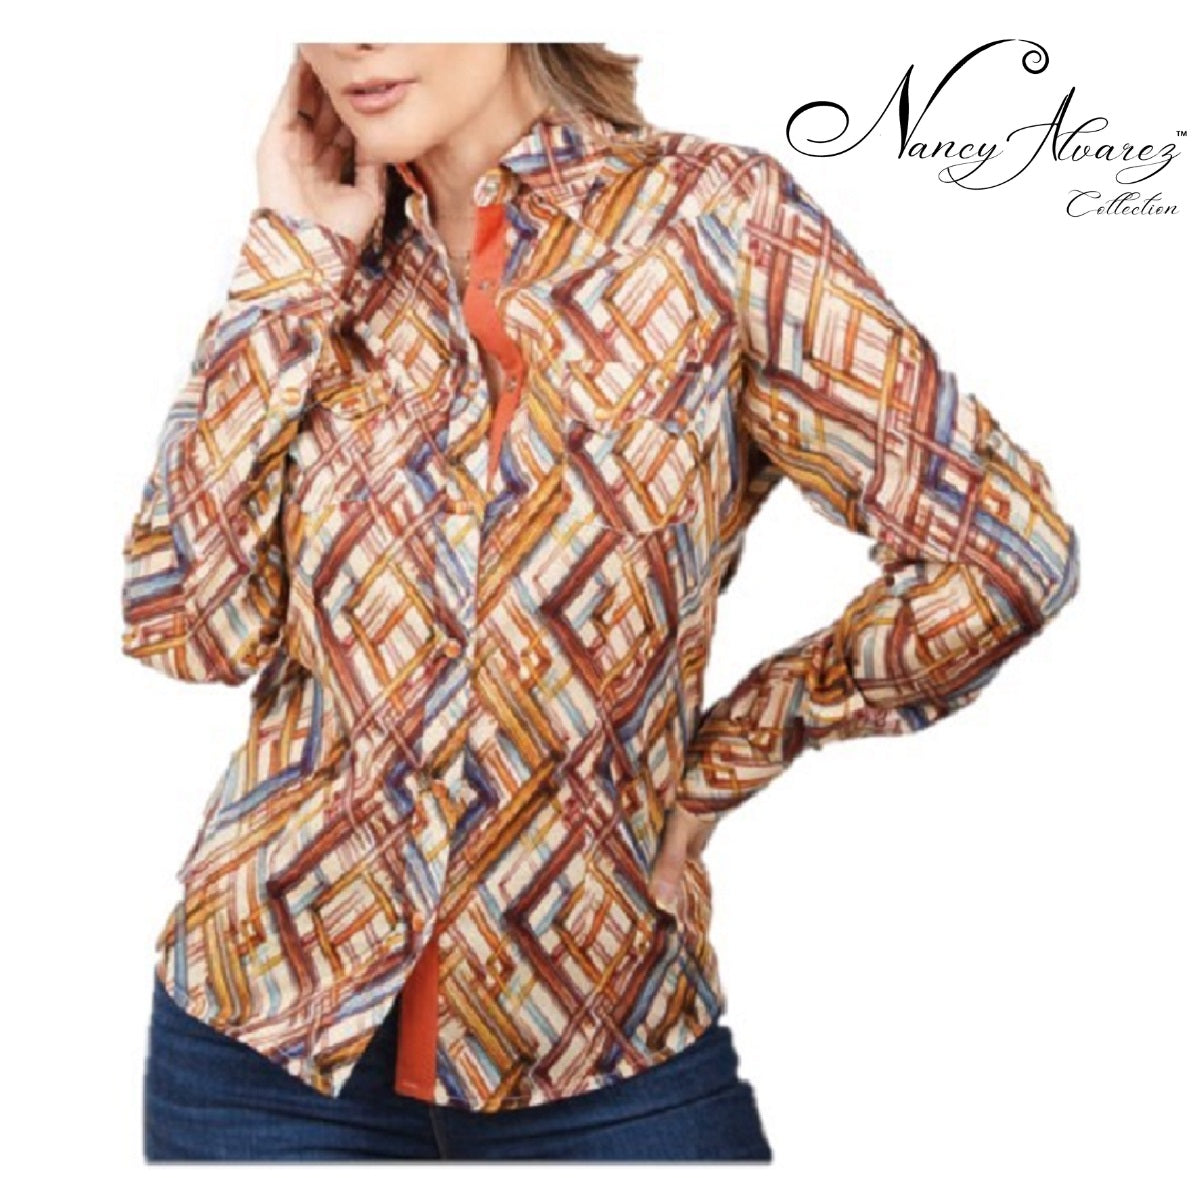 Western Shirt for Women NA-TM-WD0538